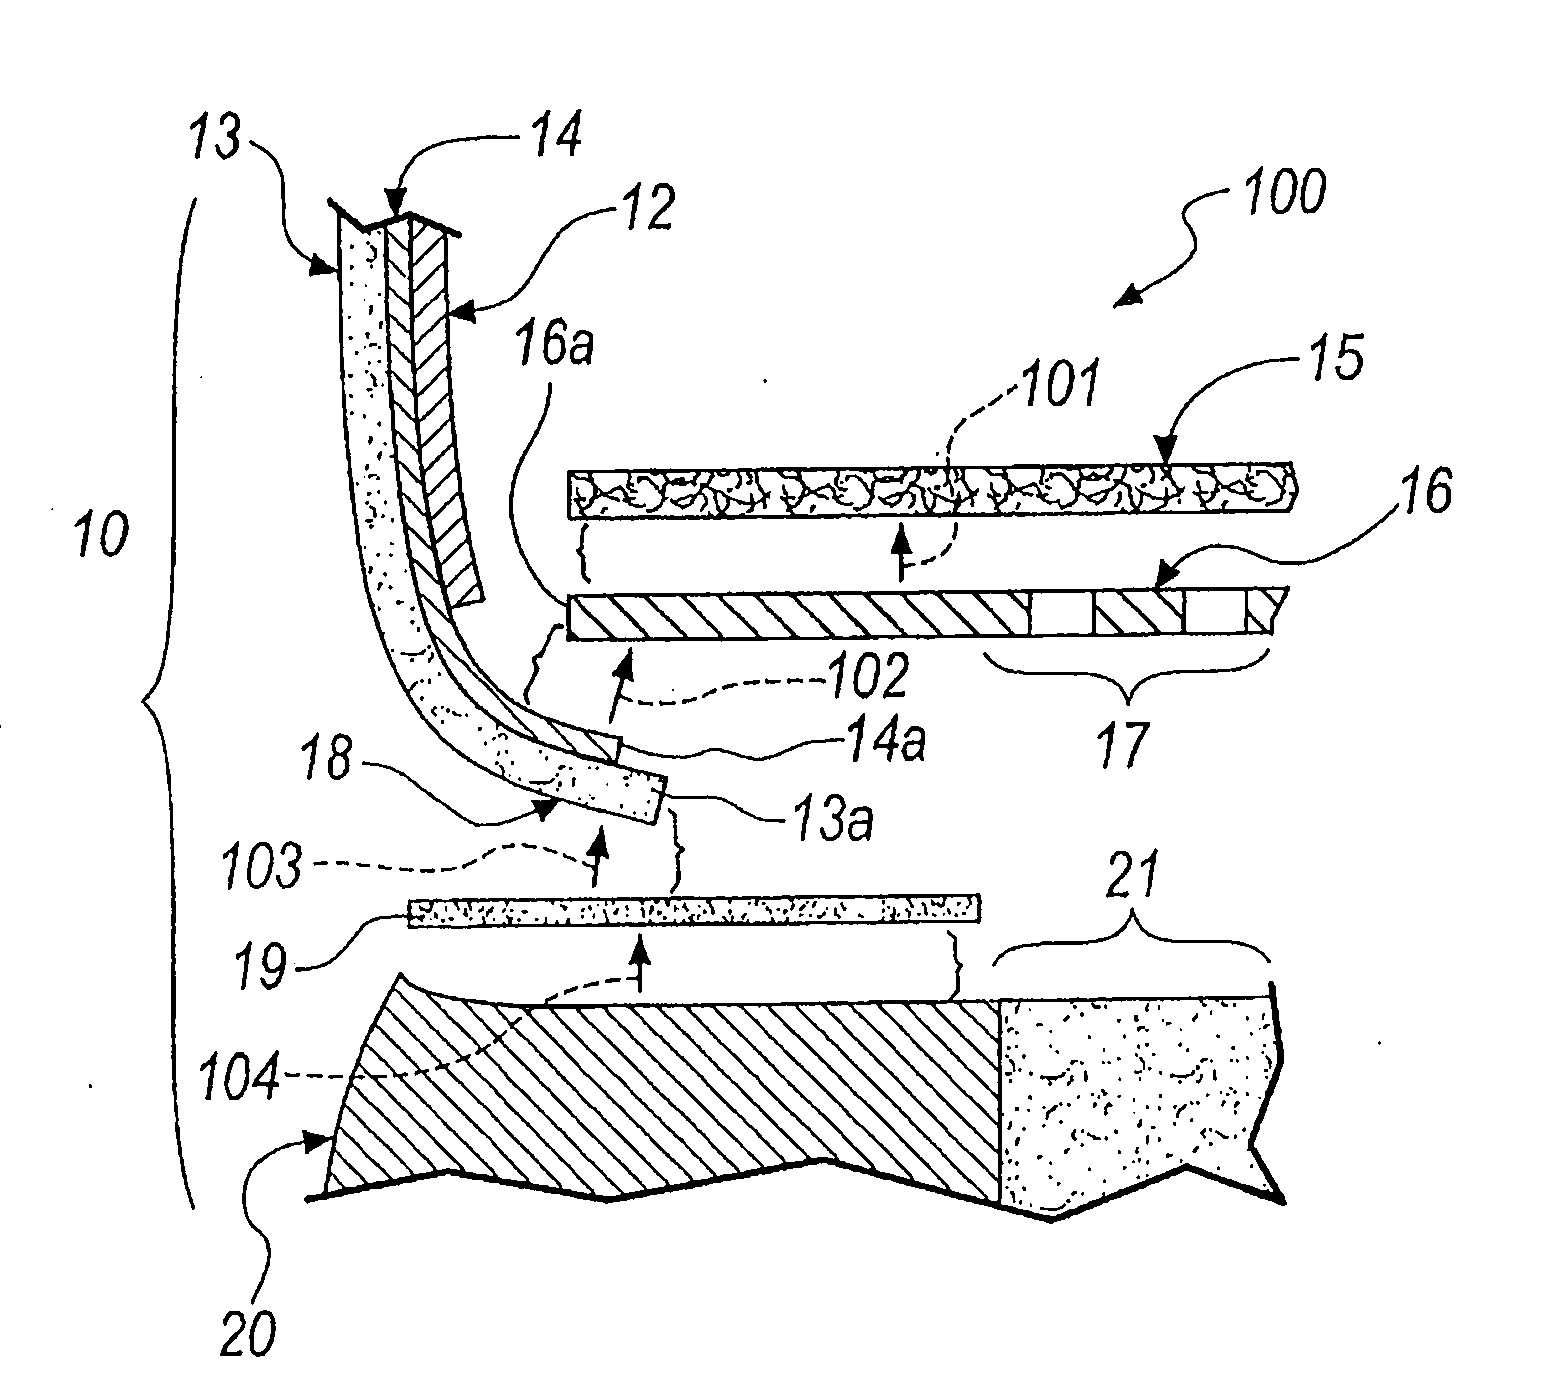 Method for manufacturing a waterproof and vapor-permeable shoe